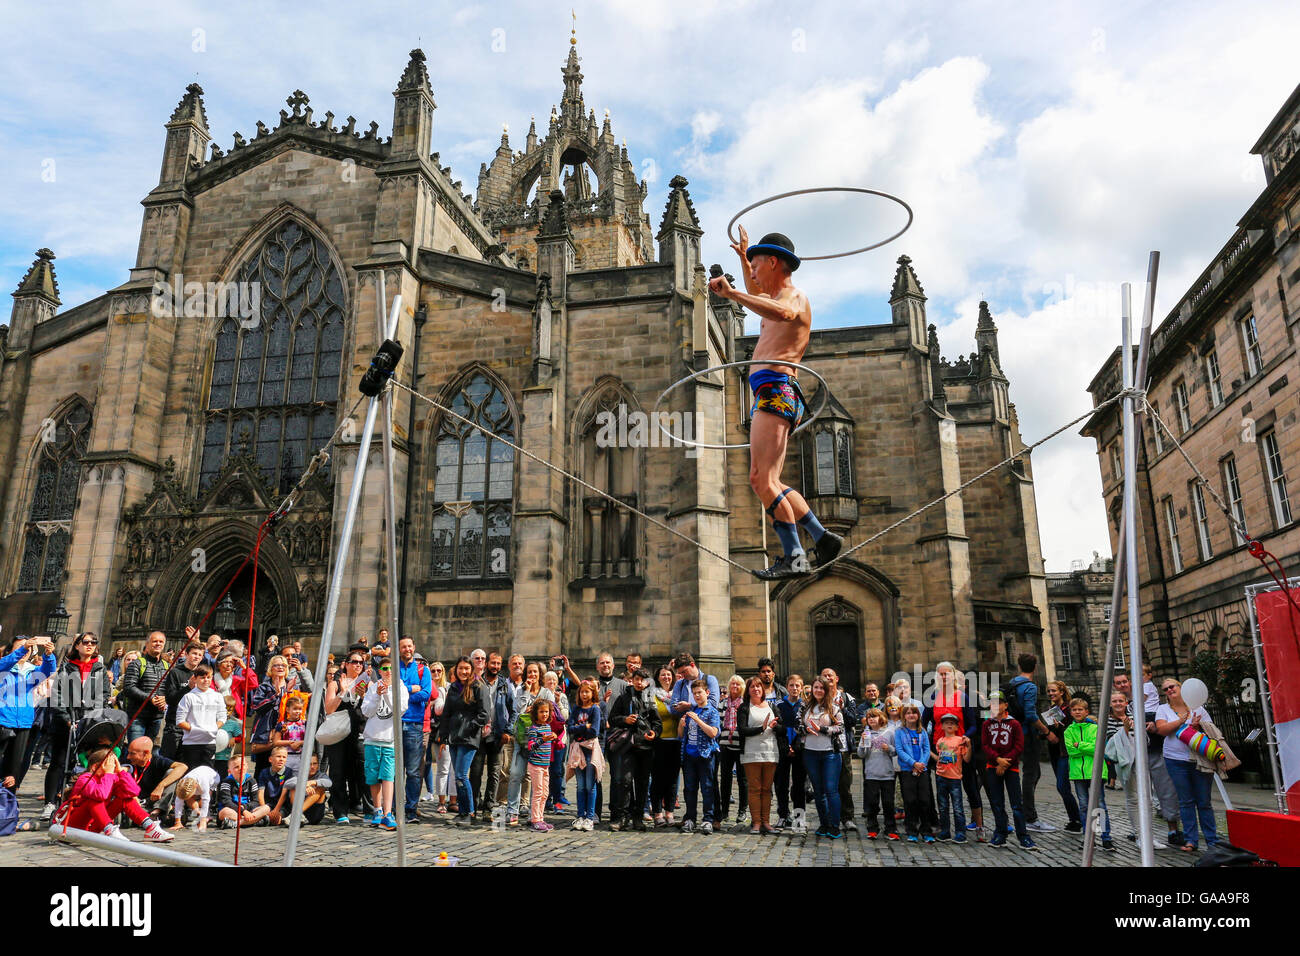 Edinburgh, UK. 05th Aug, 2016. The 69th Edinburgh Fringe Festival, considered to be the biggest Arts Festival in Britain started today with a selection of the usual acts of jugglers, magicians, musicians, comedians and vaudeville acts plying their trade along High Street and The Royal Mile. The Fringe and Festival is an annual attraction and it brings tourists from across the world to Edinburgh for 3 weeks of entertainment. Credit:  Findlay/Alamy Live News Stock Photo